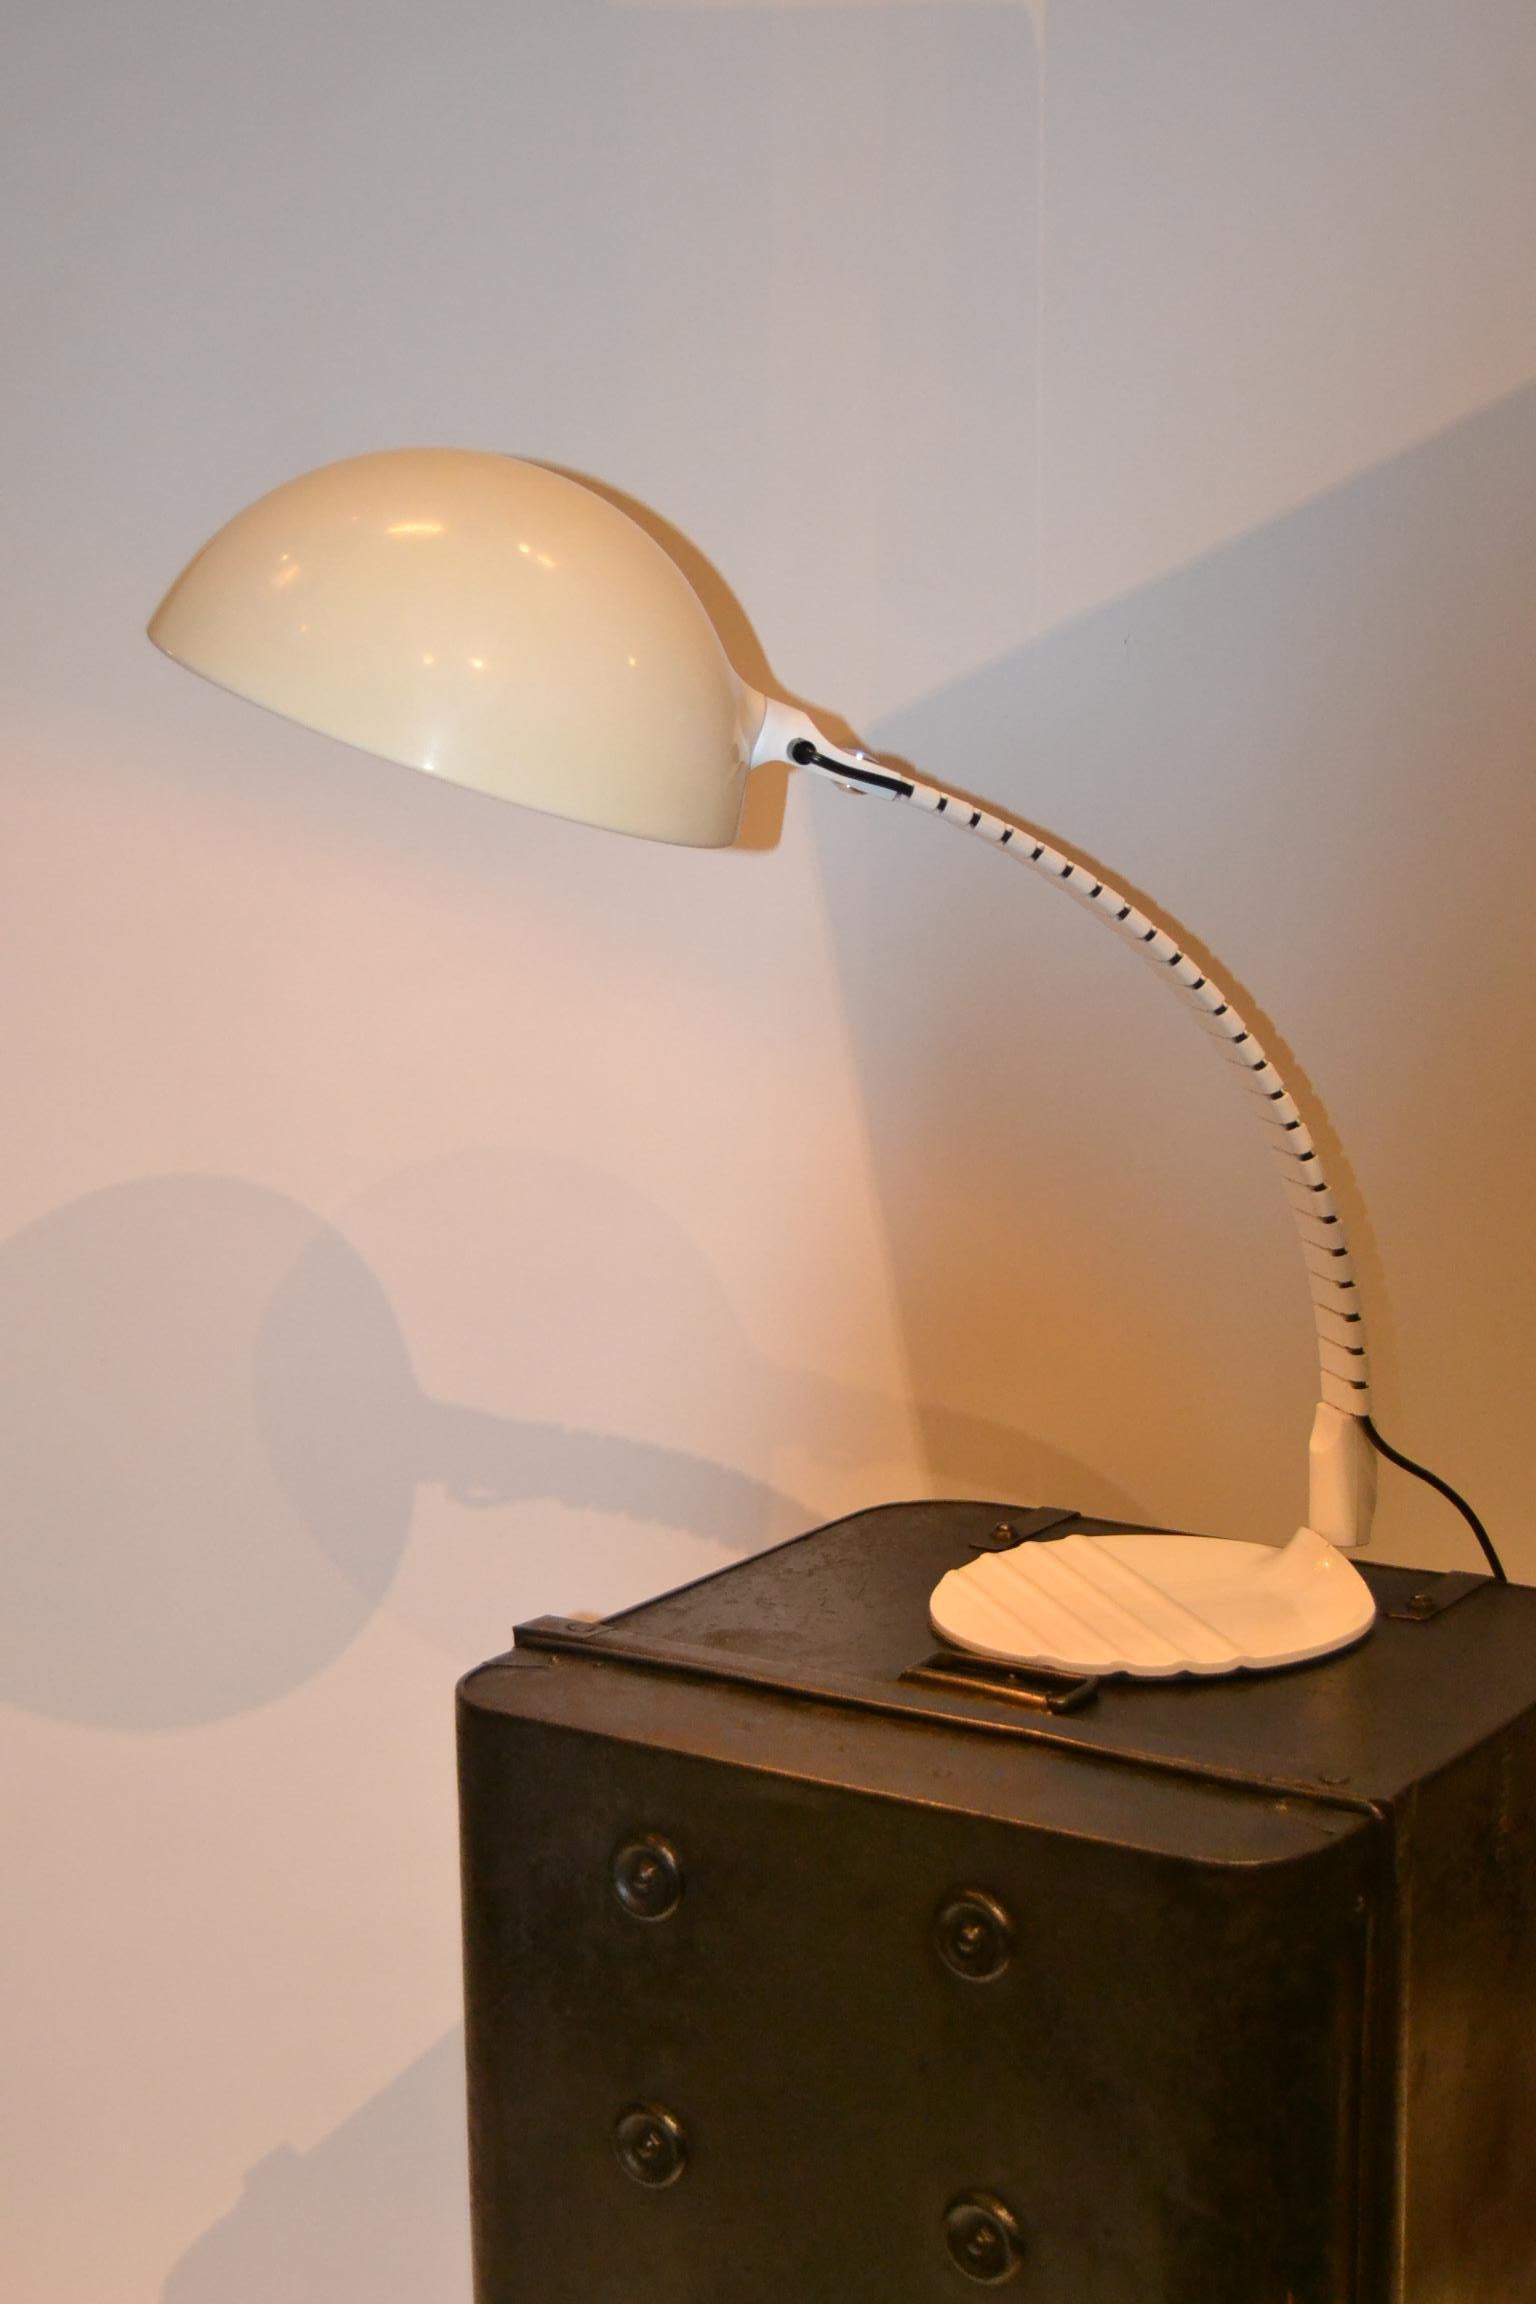 Mid-Century Modern large White Table Light - Lamp - Lighting - Flex Desk Lamp - 
Table Lamp -  Up Lighter -  Down  Lighter . 

Designed by Elio Martinelli for Martinelli Luce - Model Flex 660  - Made in Italy - 1970s.

Large light with a big